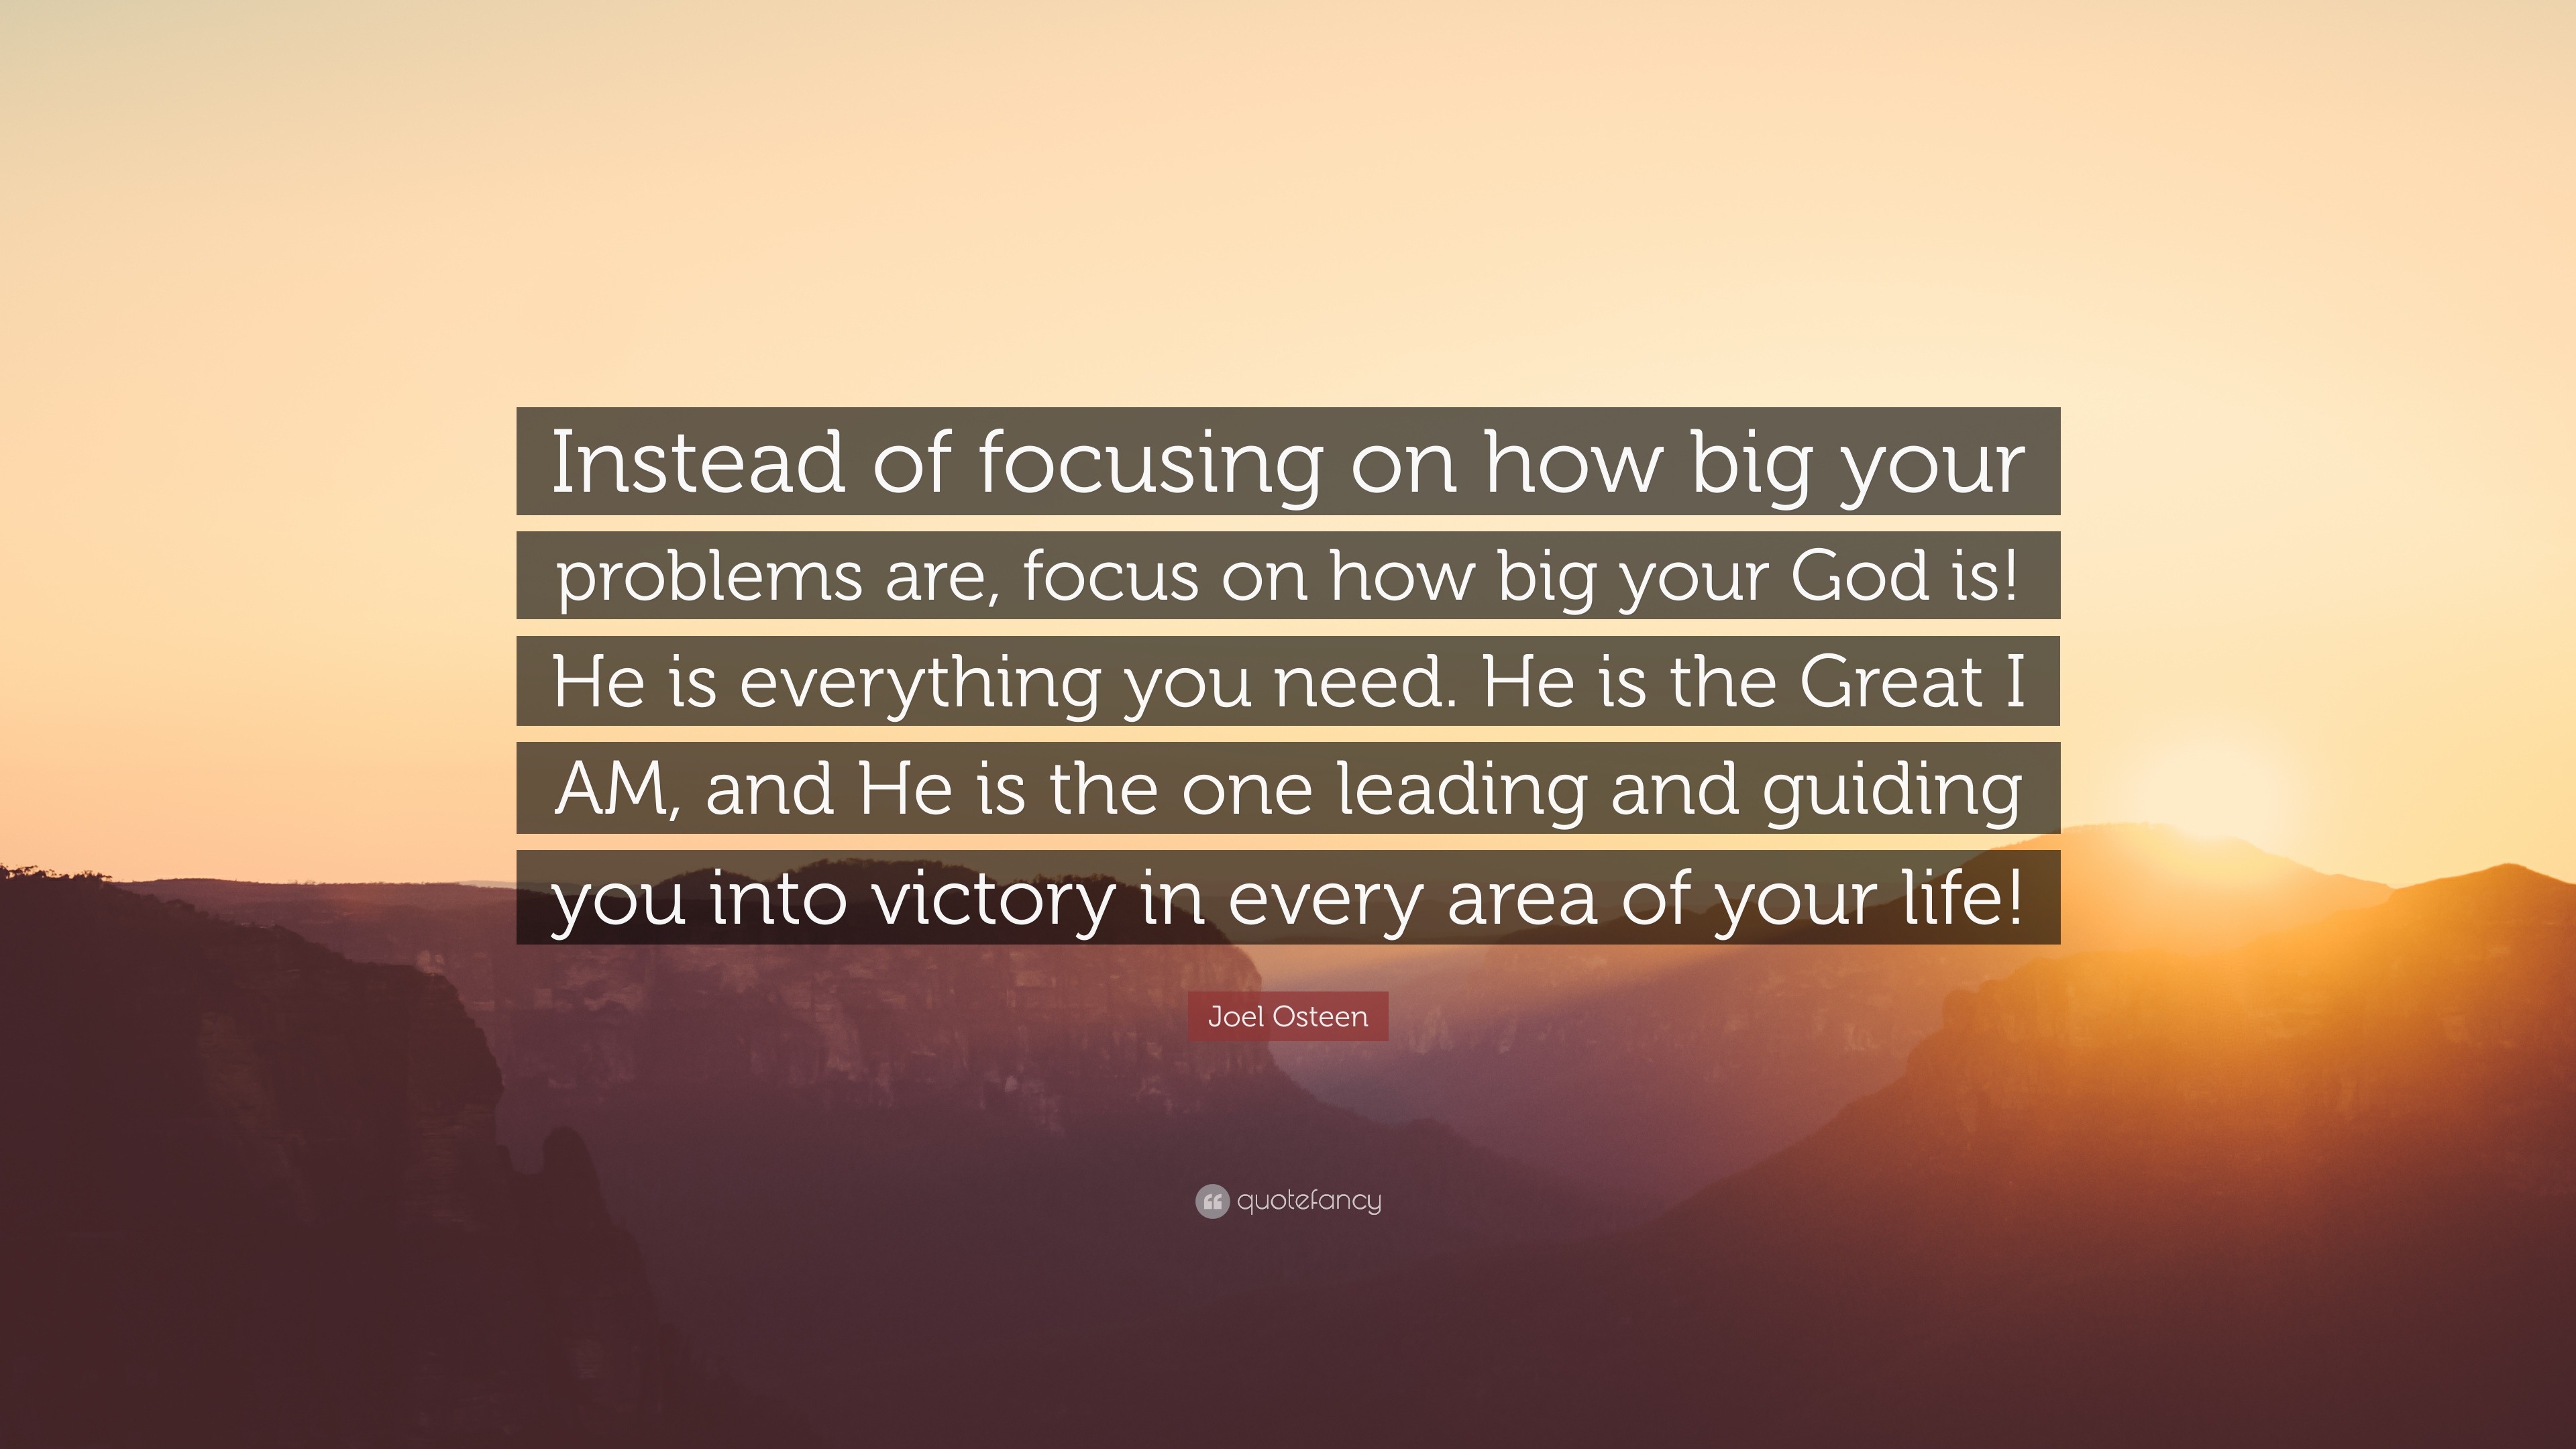 Joel Osteen Quote “Instead of focusing on how big your problems are focus